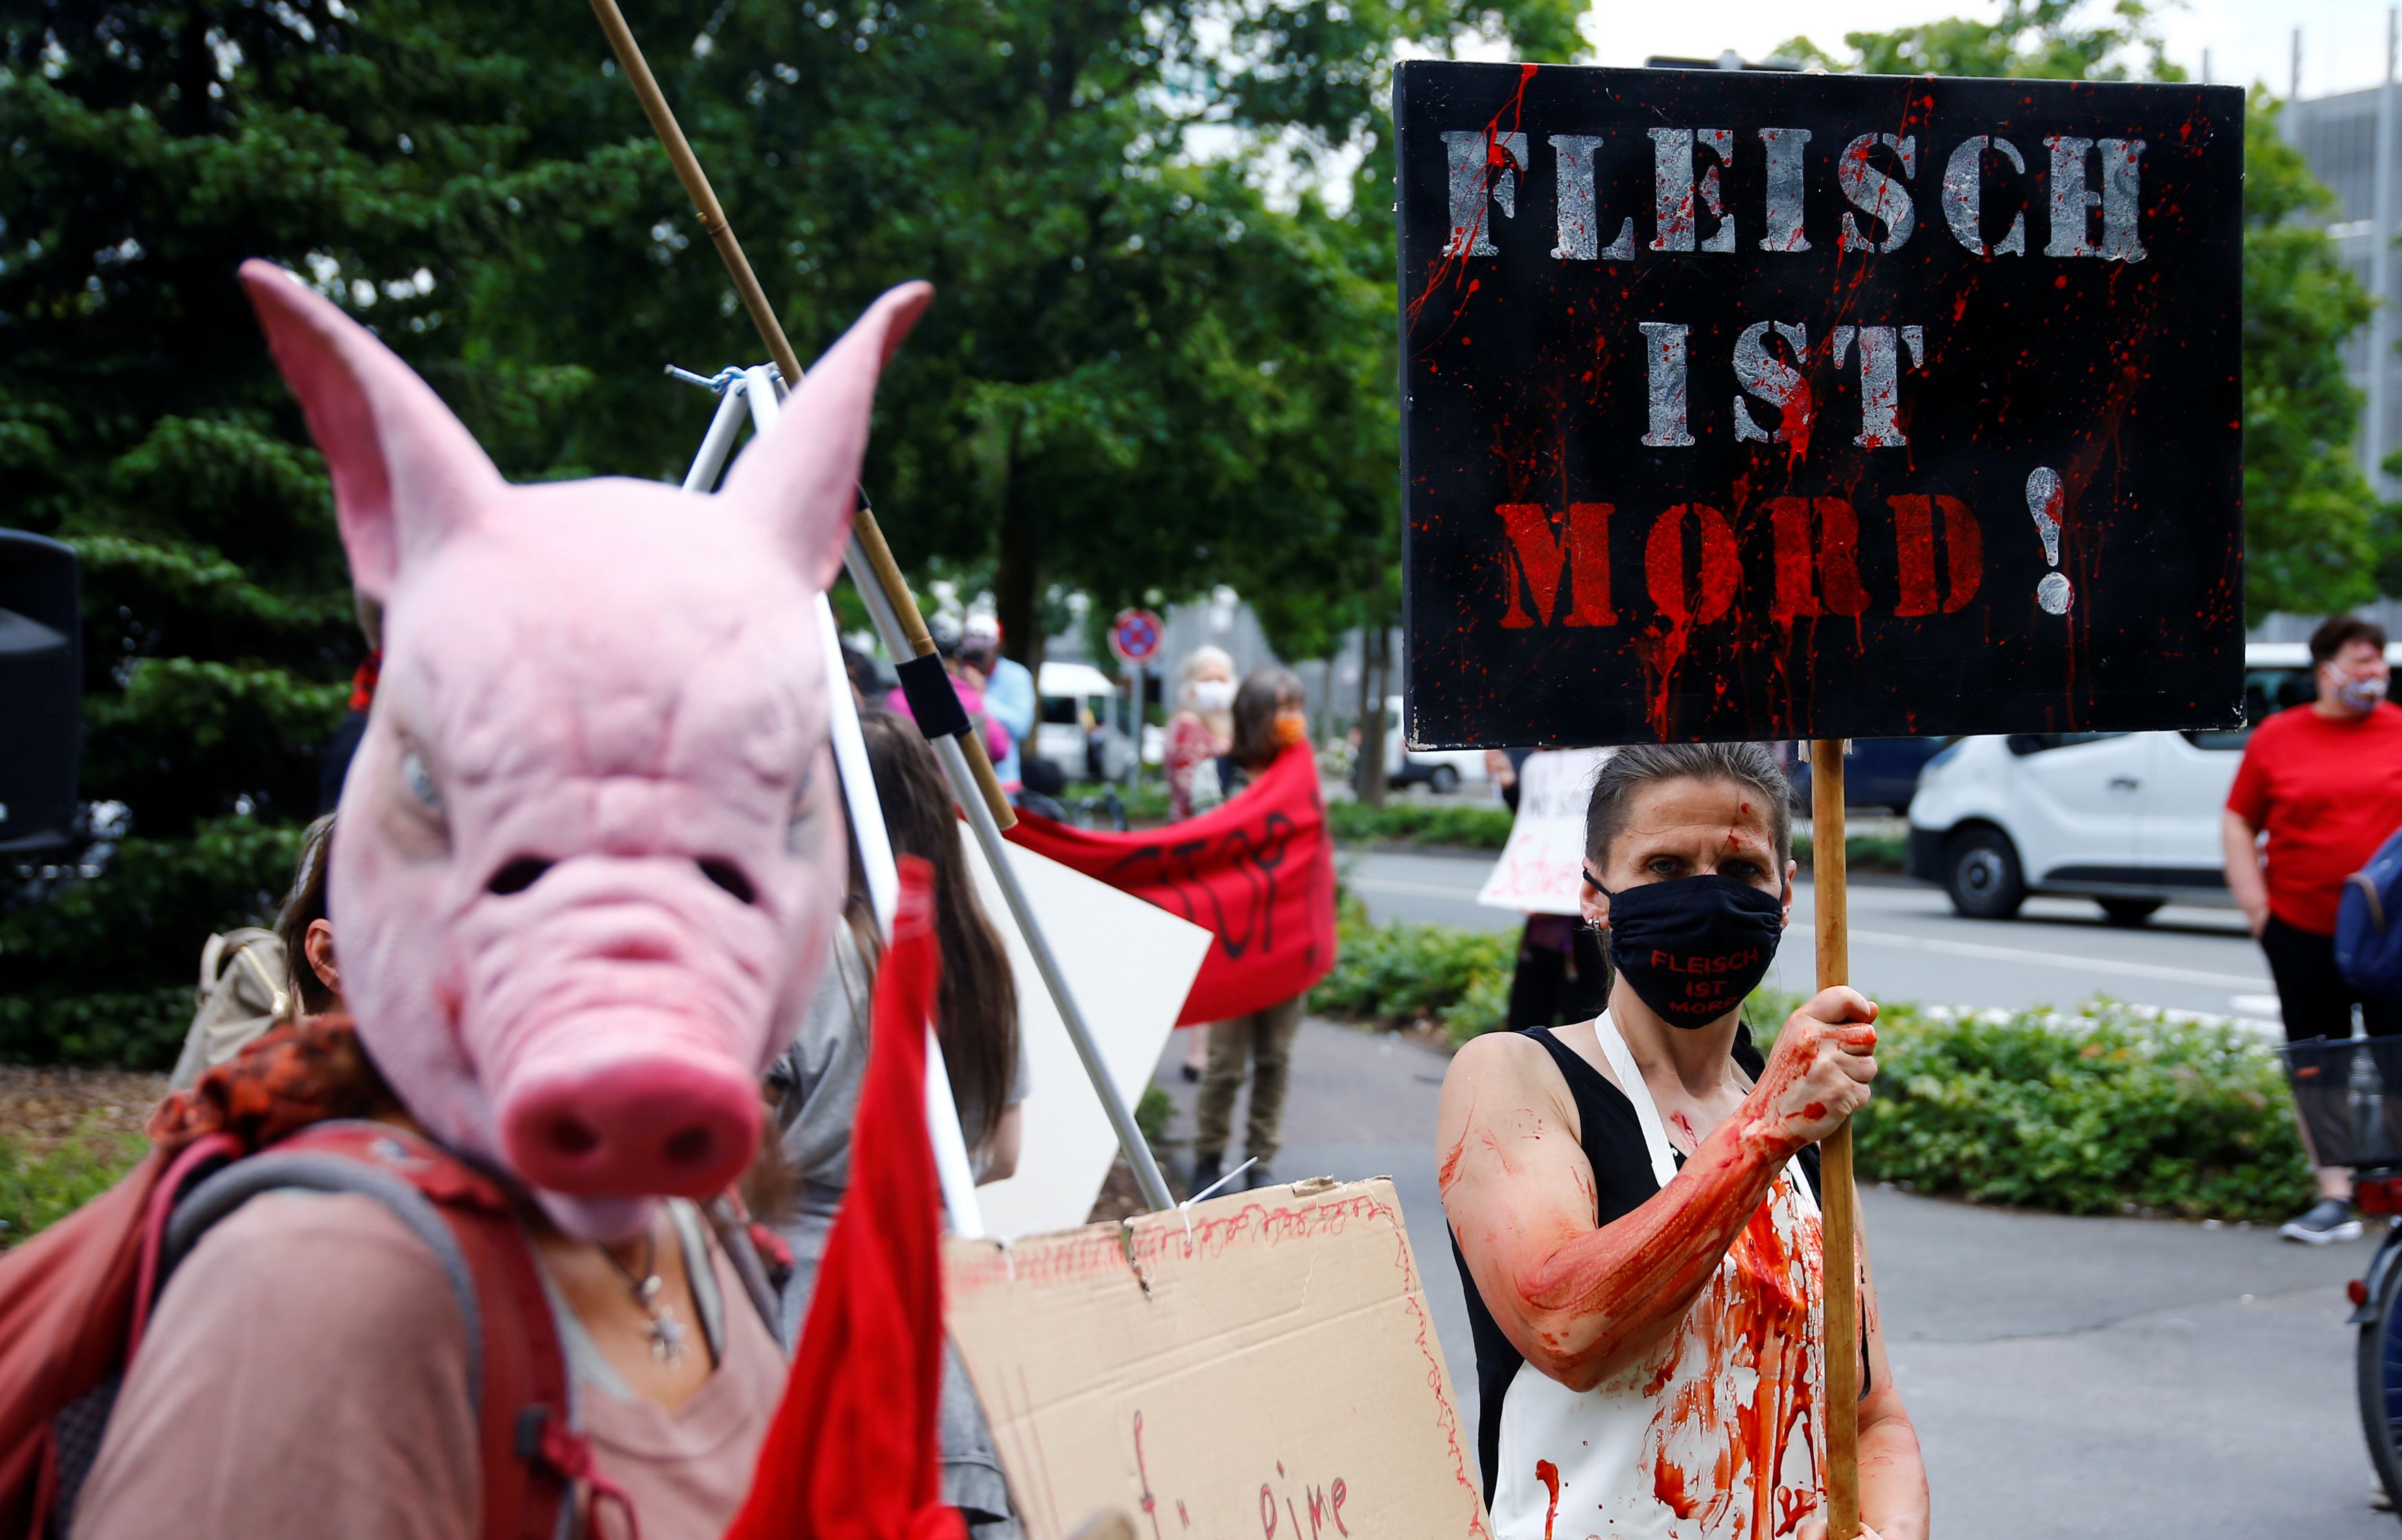 An activist holds a banner reading "Meat is murder" outside the main Toennies meat factory that had to be shut down because of the coronavirus disease (COVID-19) outbreak among its employees, in Rheda-Wiedenbrueck, Germany June 20, 2020. REUTERS/Leon Kuegeler